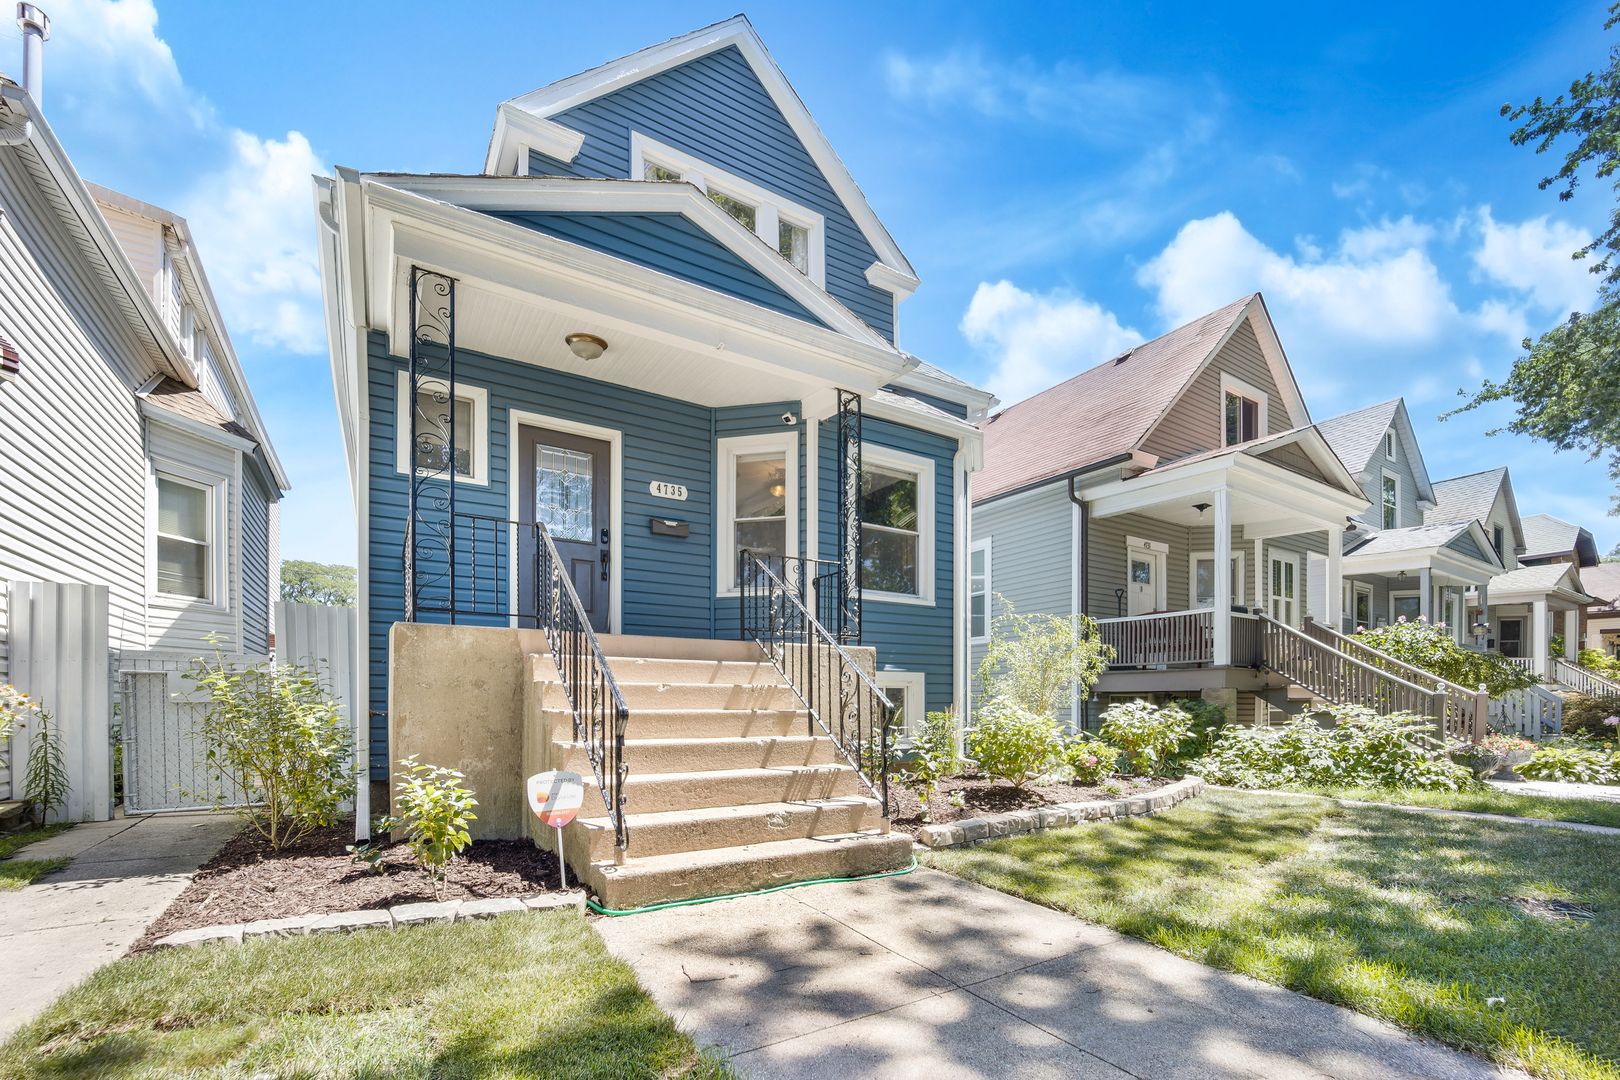 Main Photo: 4735 N Avers Avenue in Chicago: CHI - Albany Park Residential for sale ()  : MLS®# 11645058